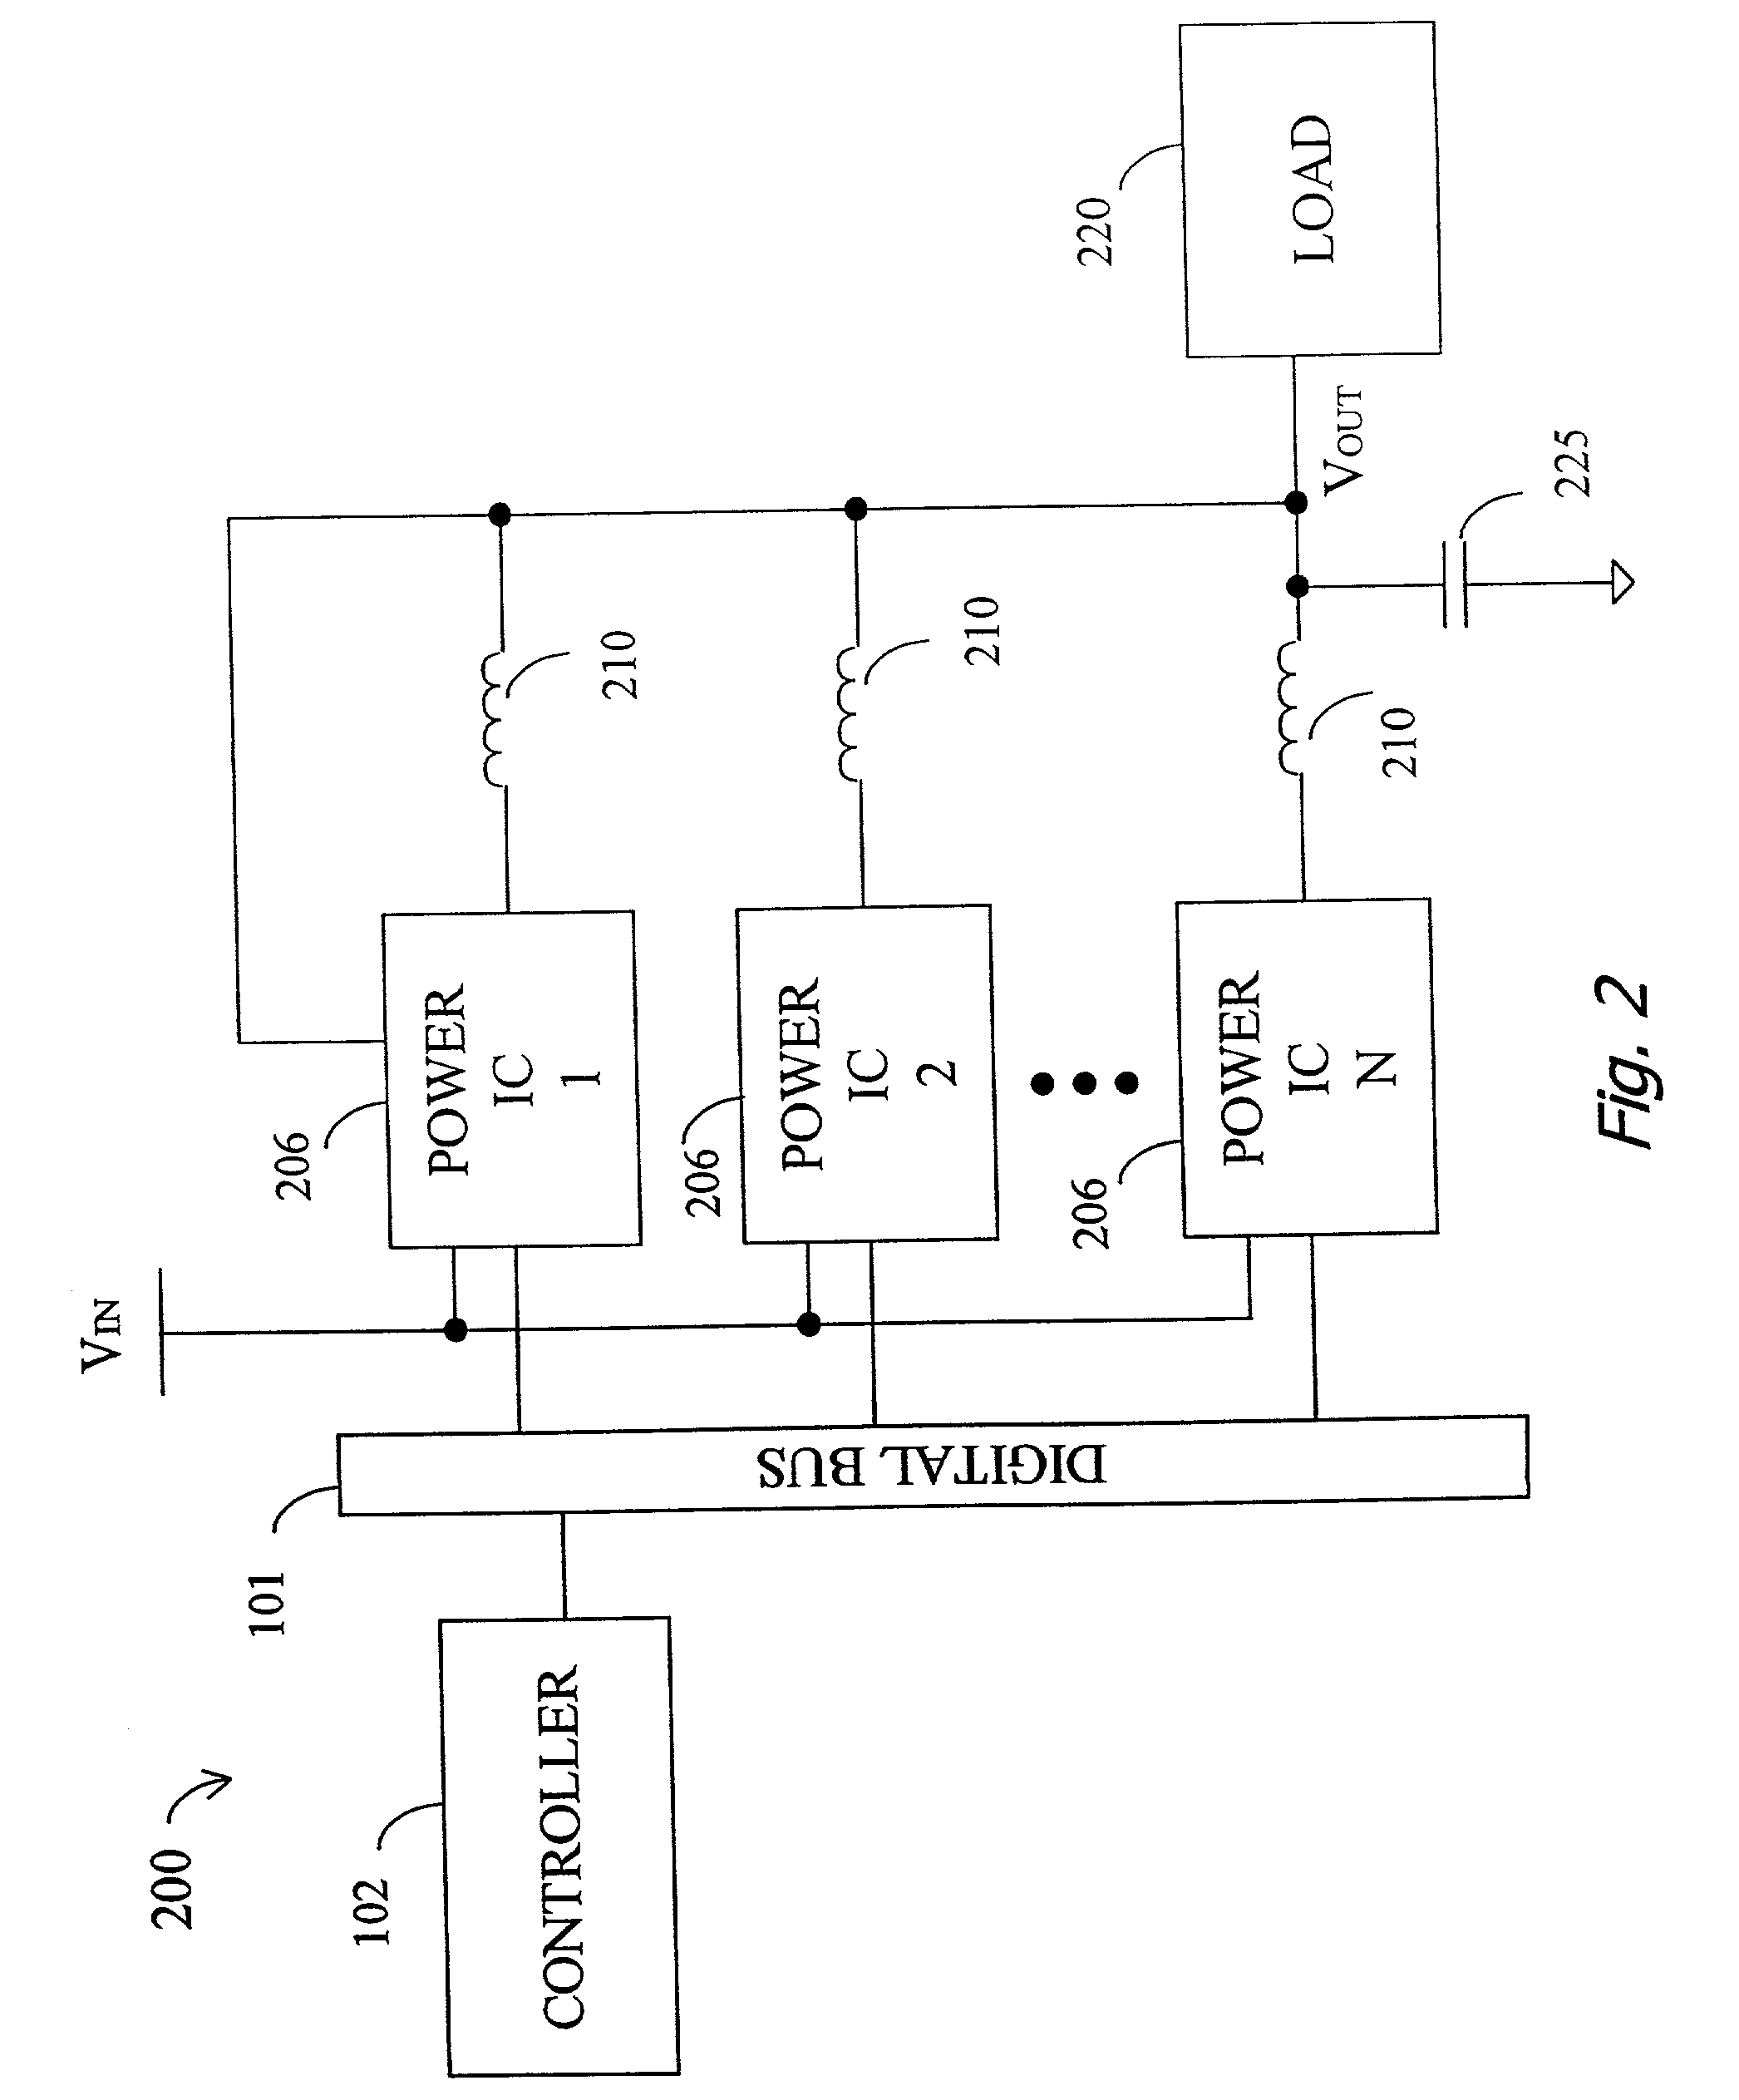 System and method for highly phased power regulation using adaptive compensation control